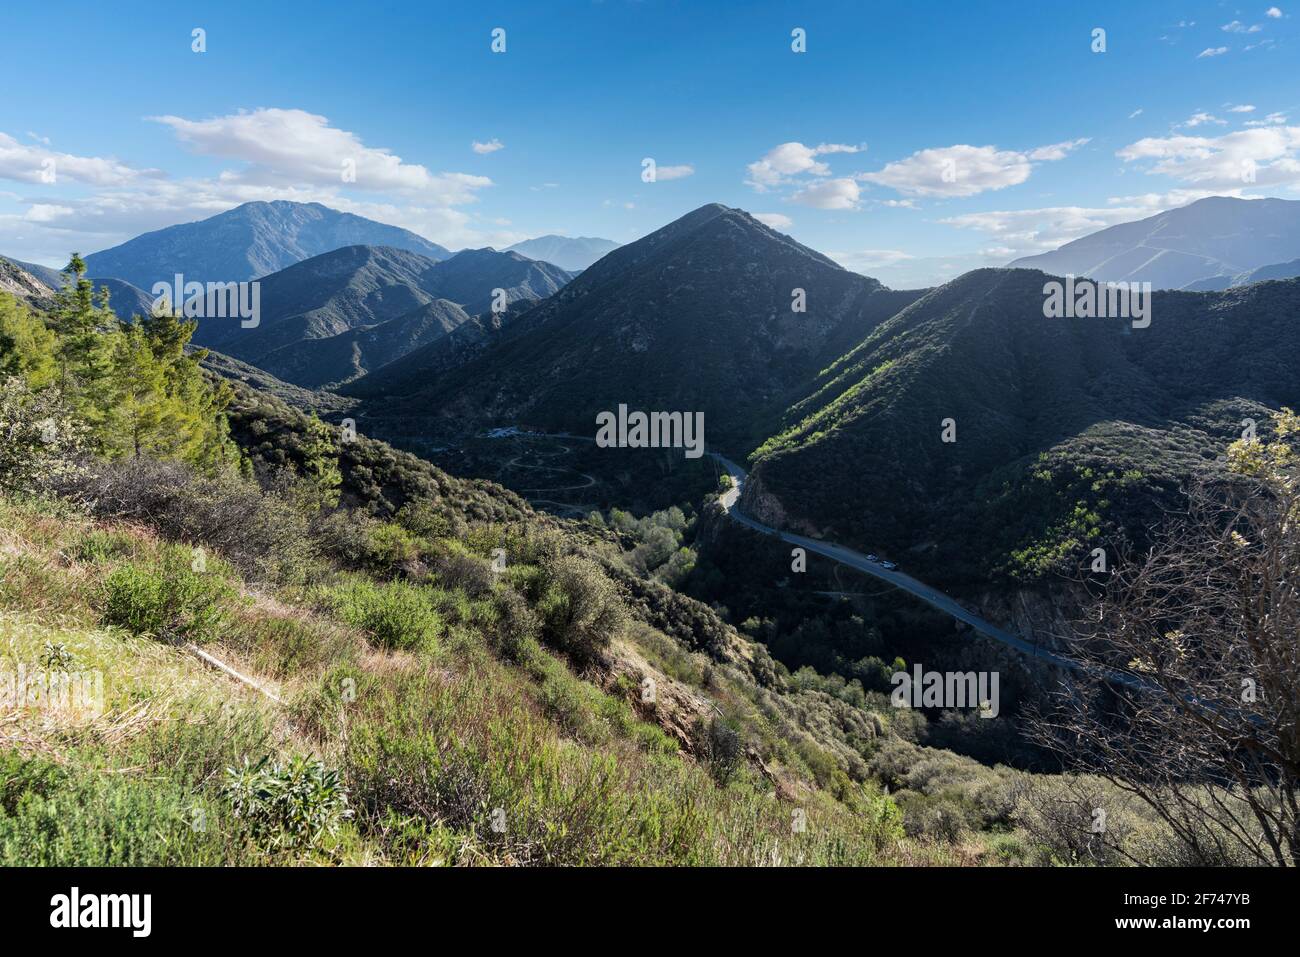 View of the East Fork of the San Gabriel river canyon in the San Gabriel Mountains National Monument of Los Angeles County California. Stock Photo